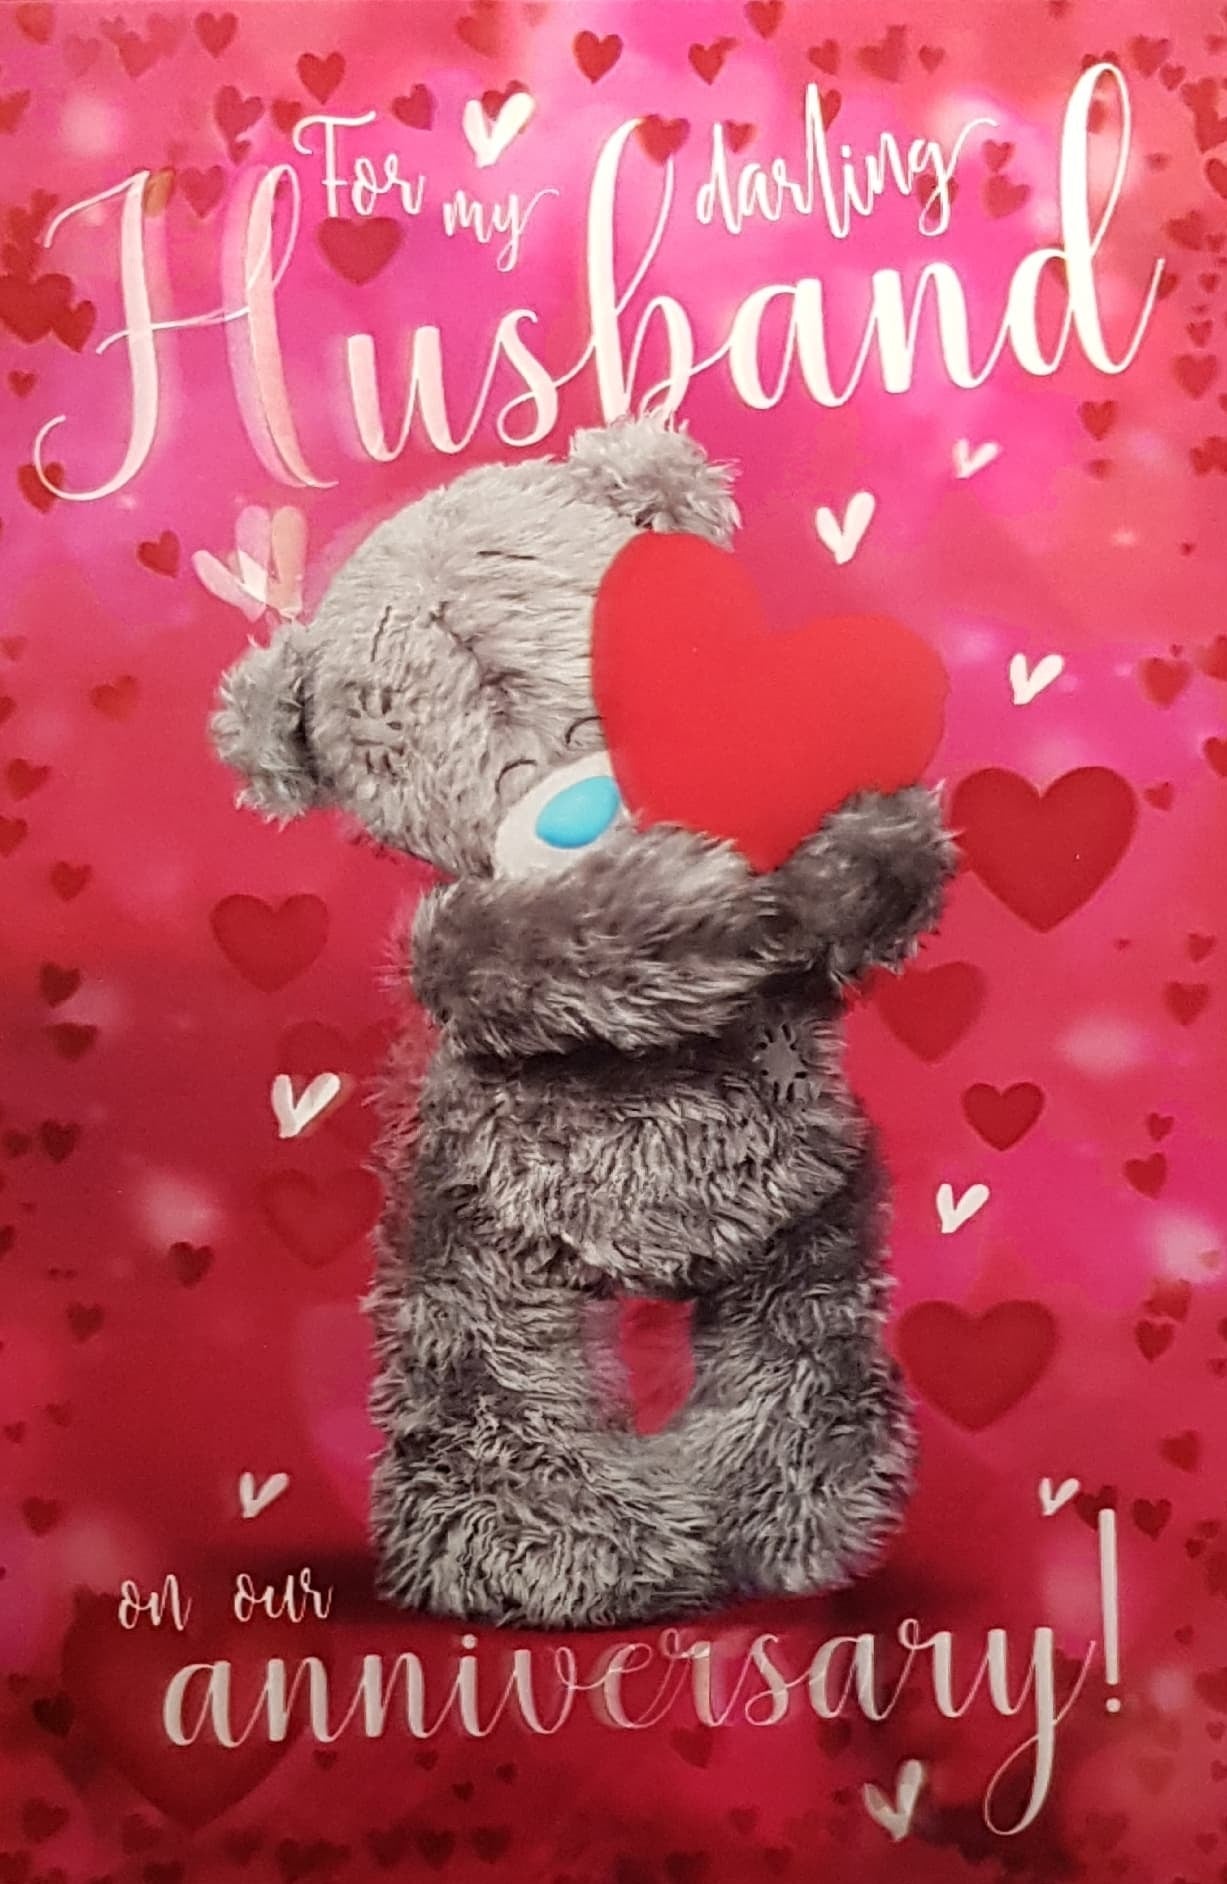 Anniversary Card - Husband / Fluffy Teddy Holding A Red Heart & Hearts In A Background